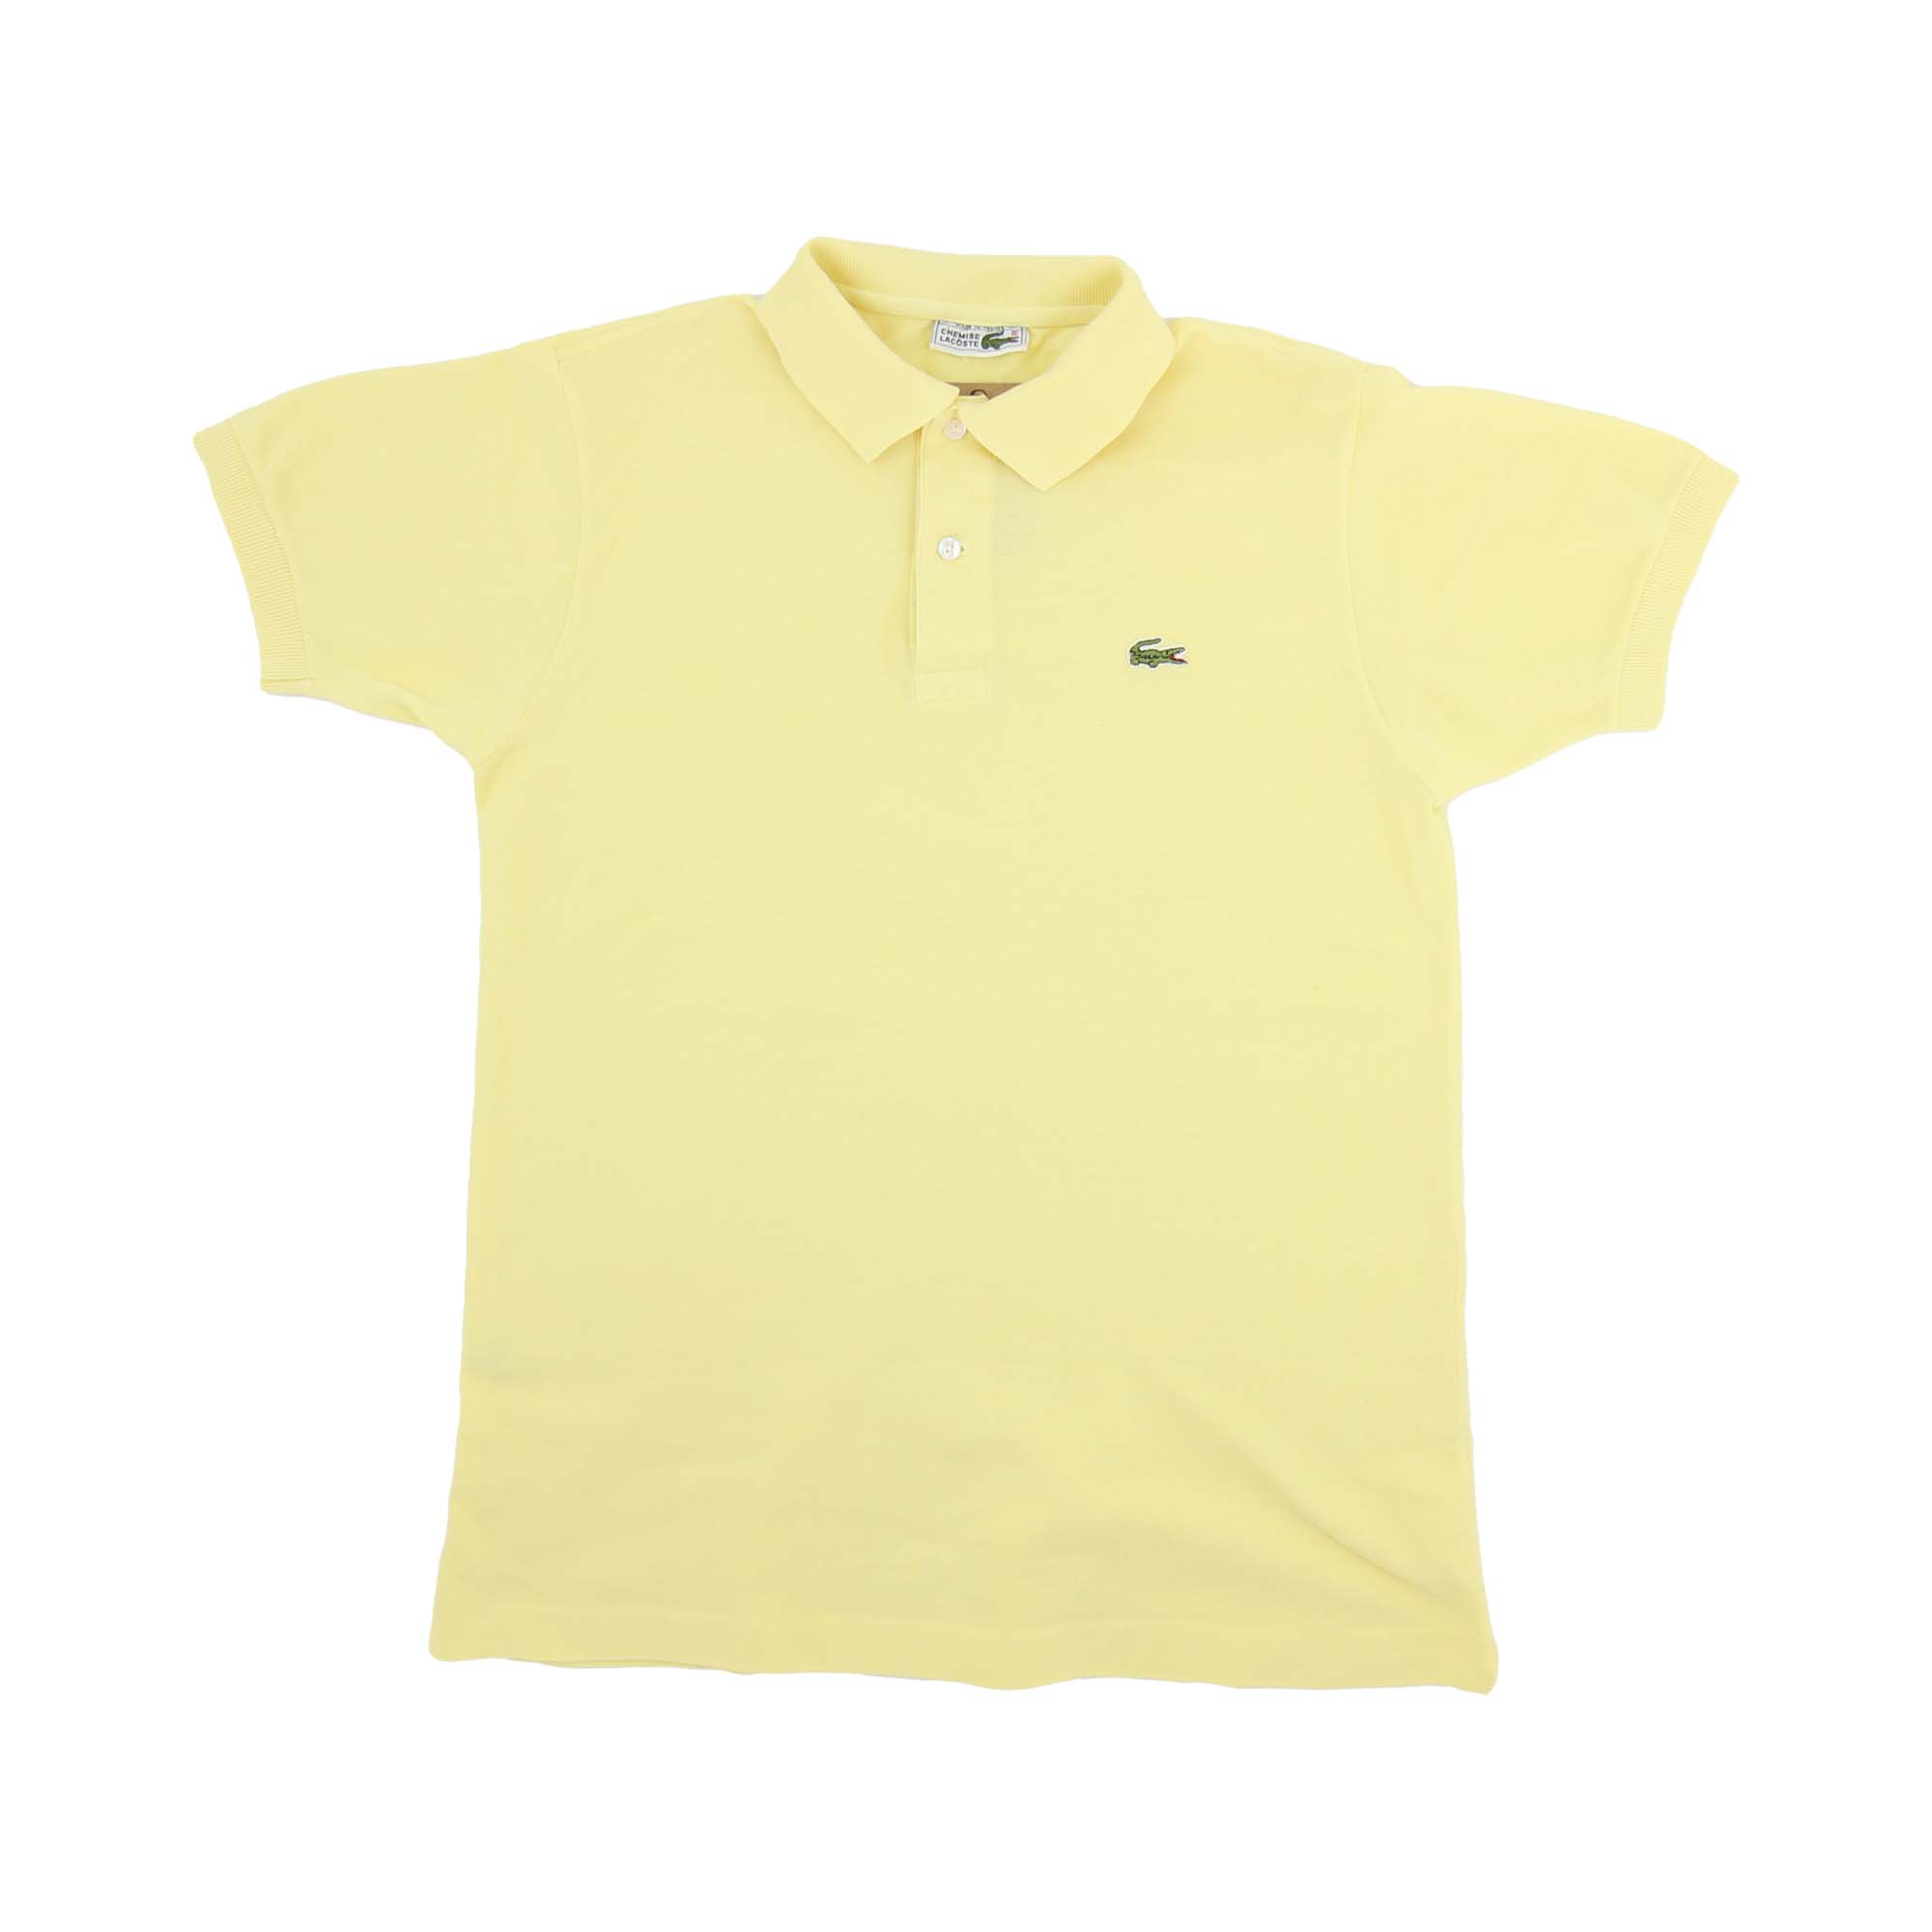 Lacoste Embroidered Logo Polo Shirt - M